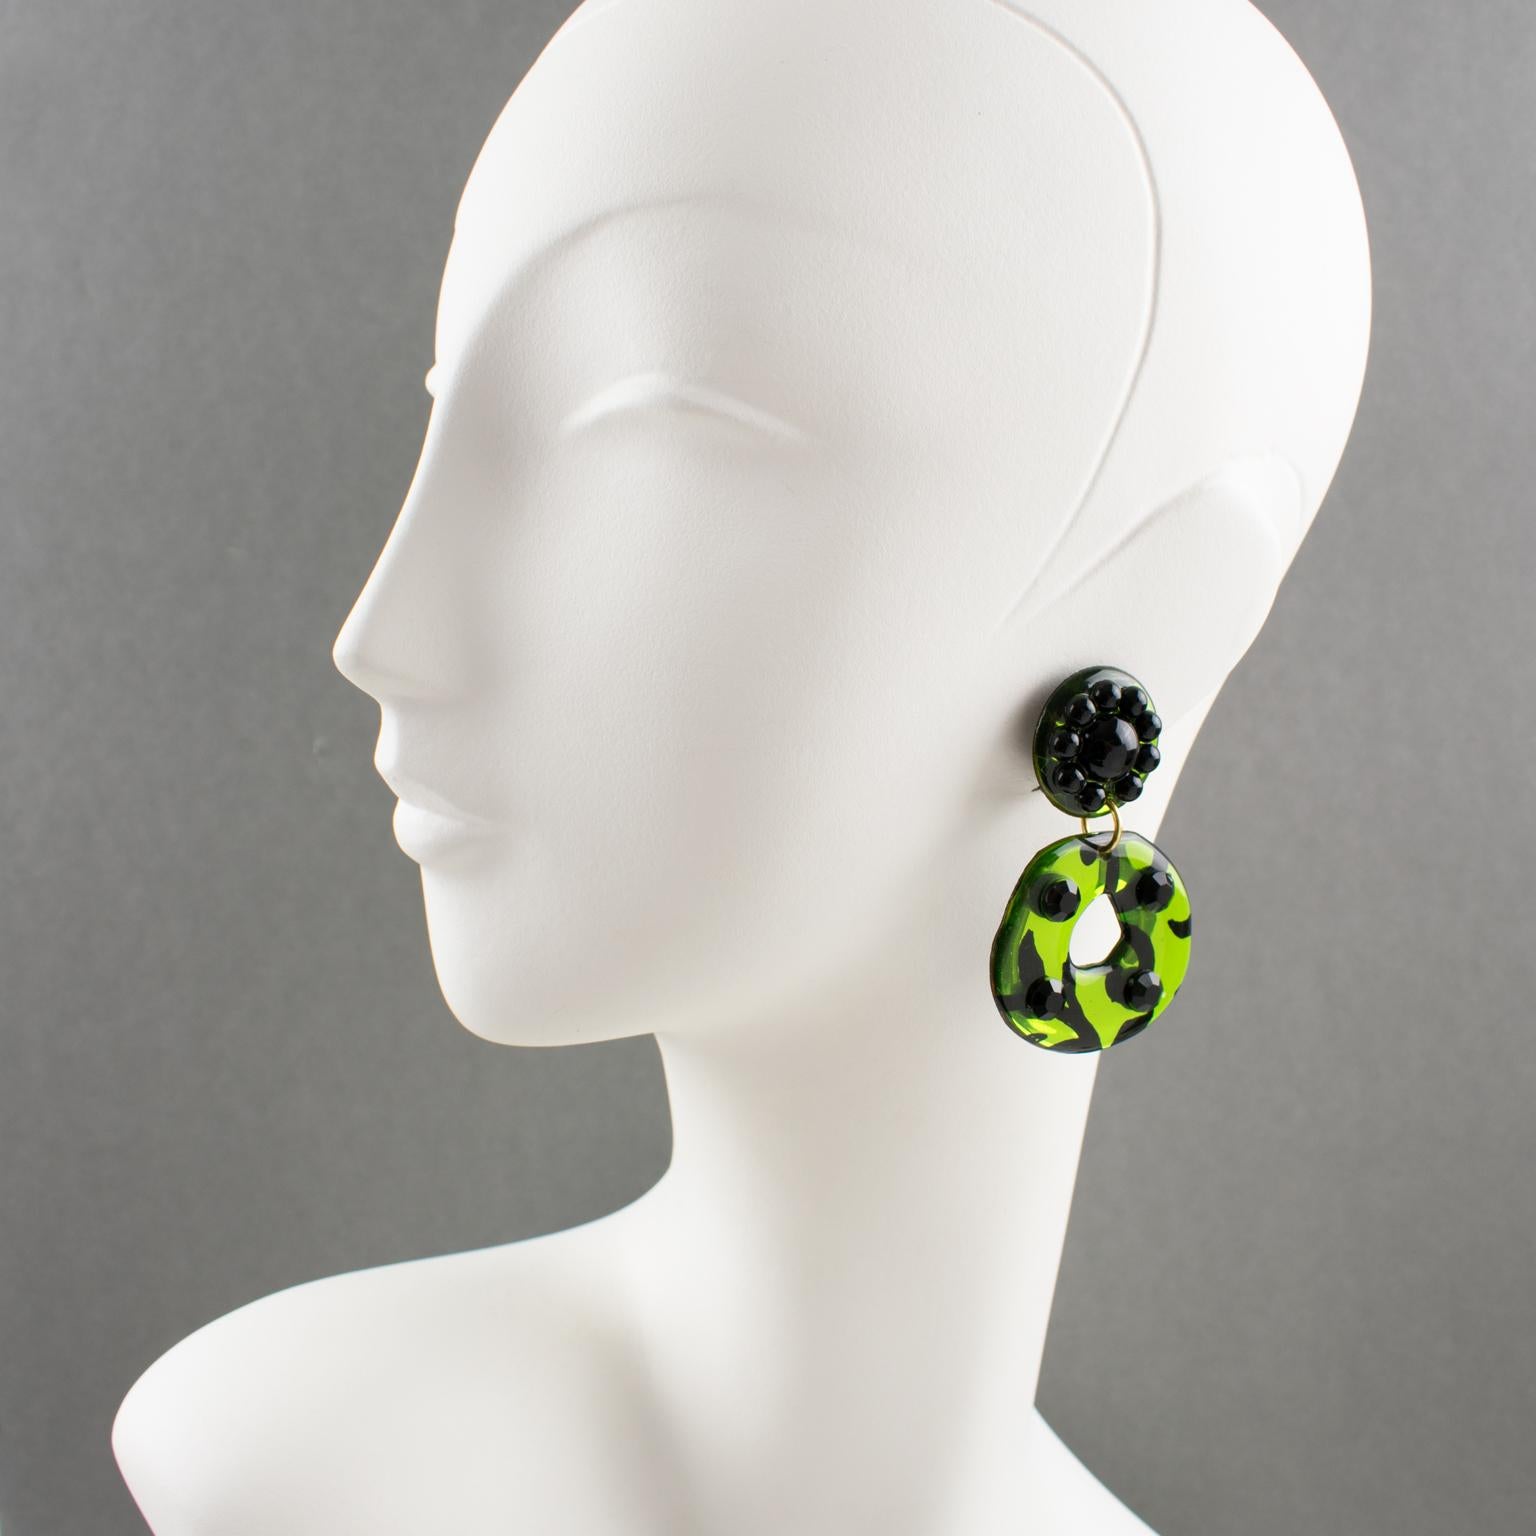 These incredible Italian designer studio Lucite or resin dangling clip-on earrings feature a massive donut shape in a shamrock green mirrored textured pattern contrasted with black stripes and topped with licorice black crystal rhinestones. The clip